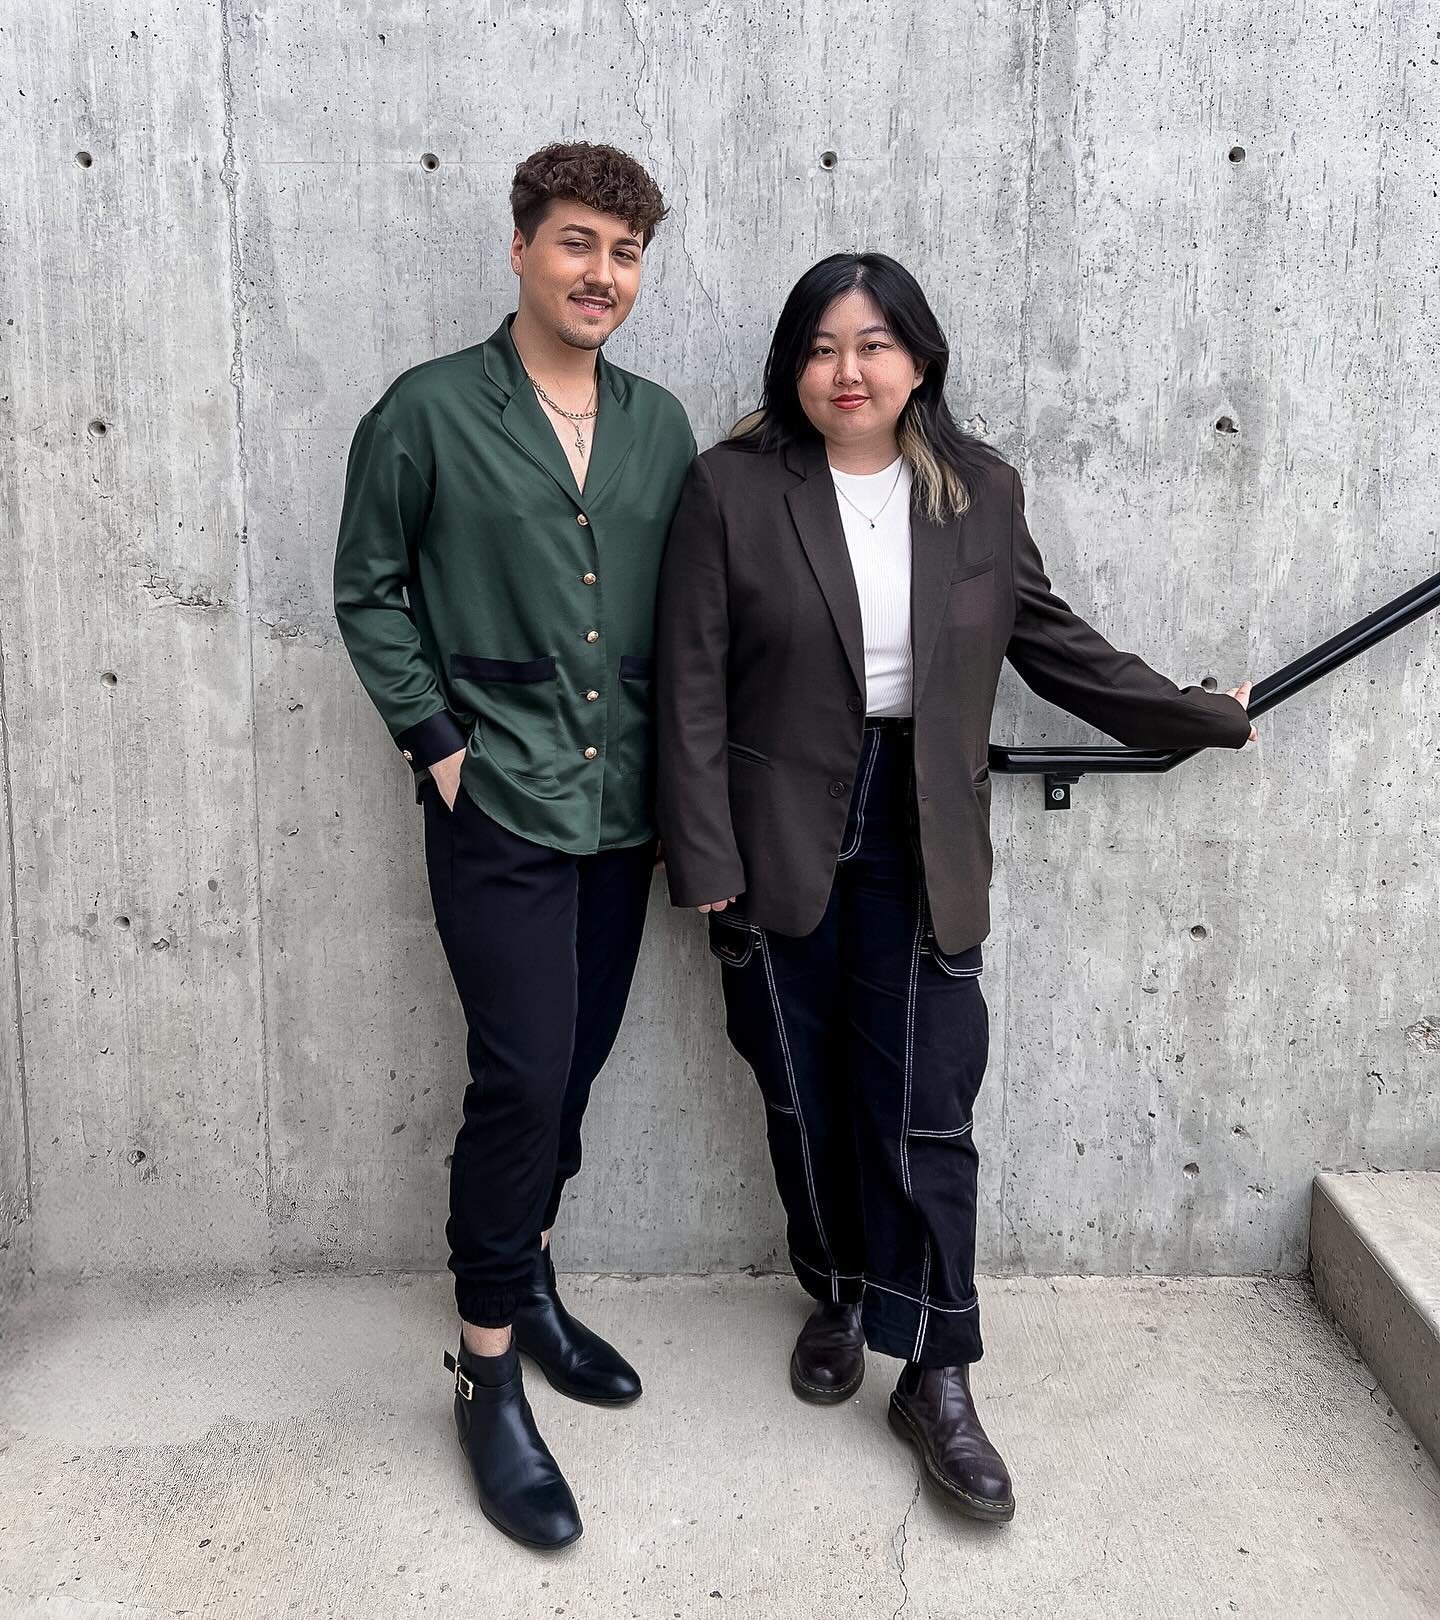 We&rsquo;re very very VERY excited to introduce you to our newest team members here at Kaden Ave! 🎉 

Anthony and Sophia are joining us for their spring practicum as a part of the @macewanu PR program. You&rsquo;ll see lots of them on our Stories an